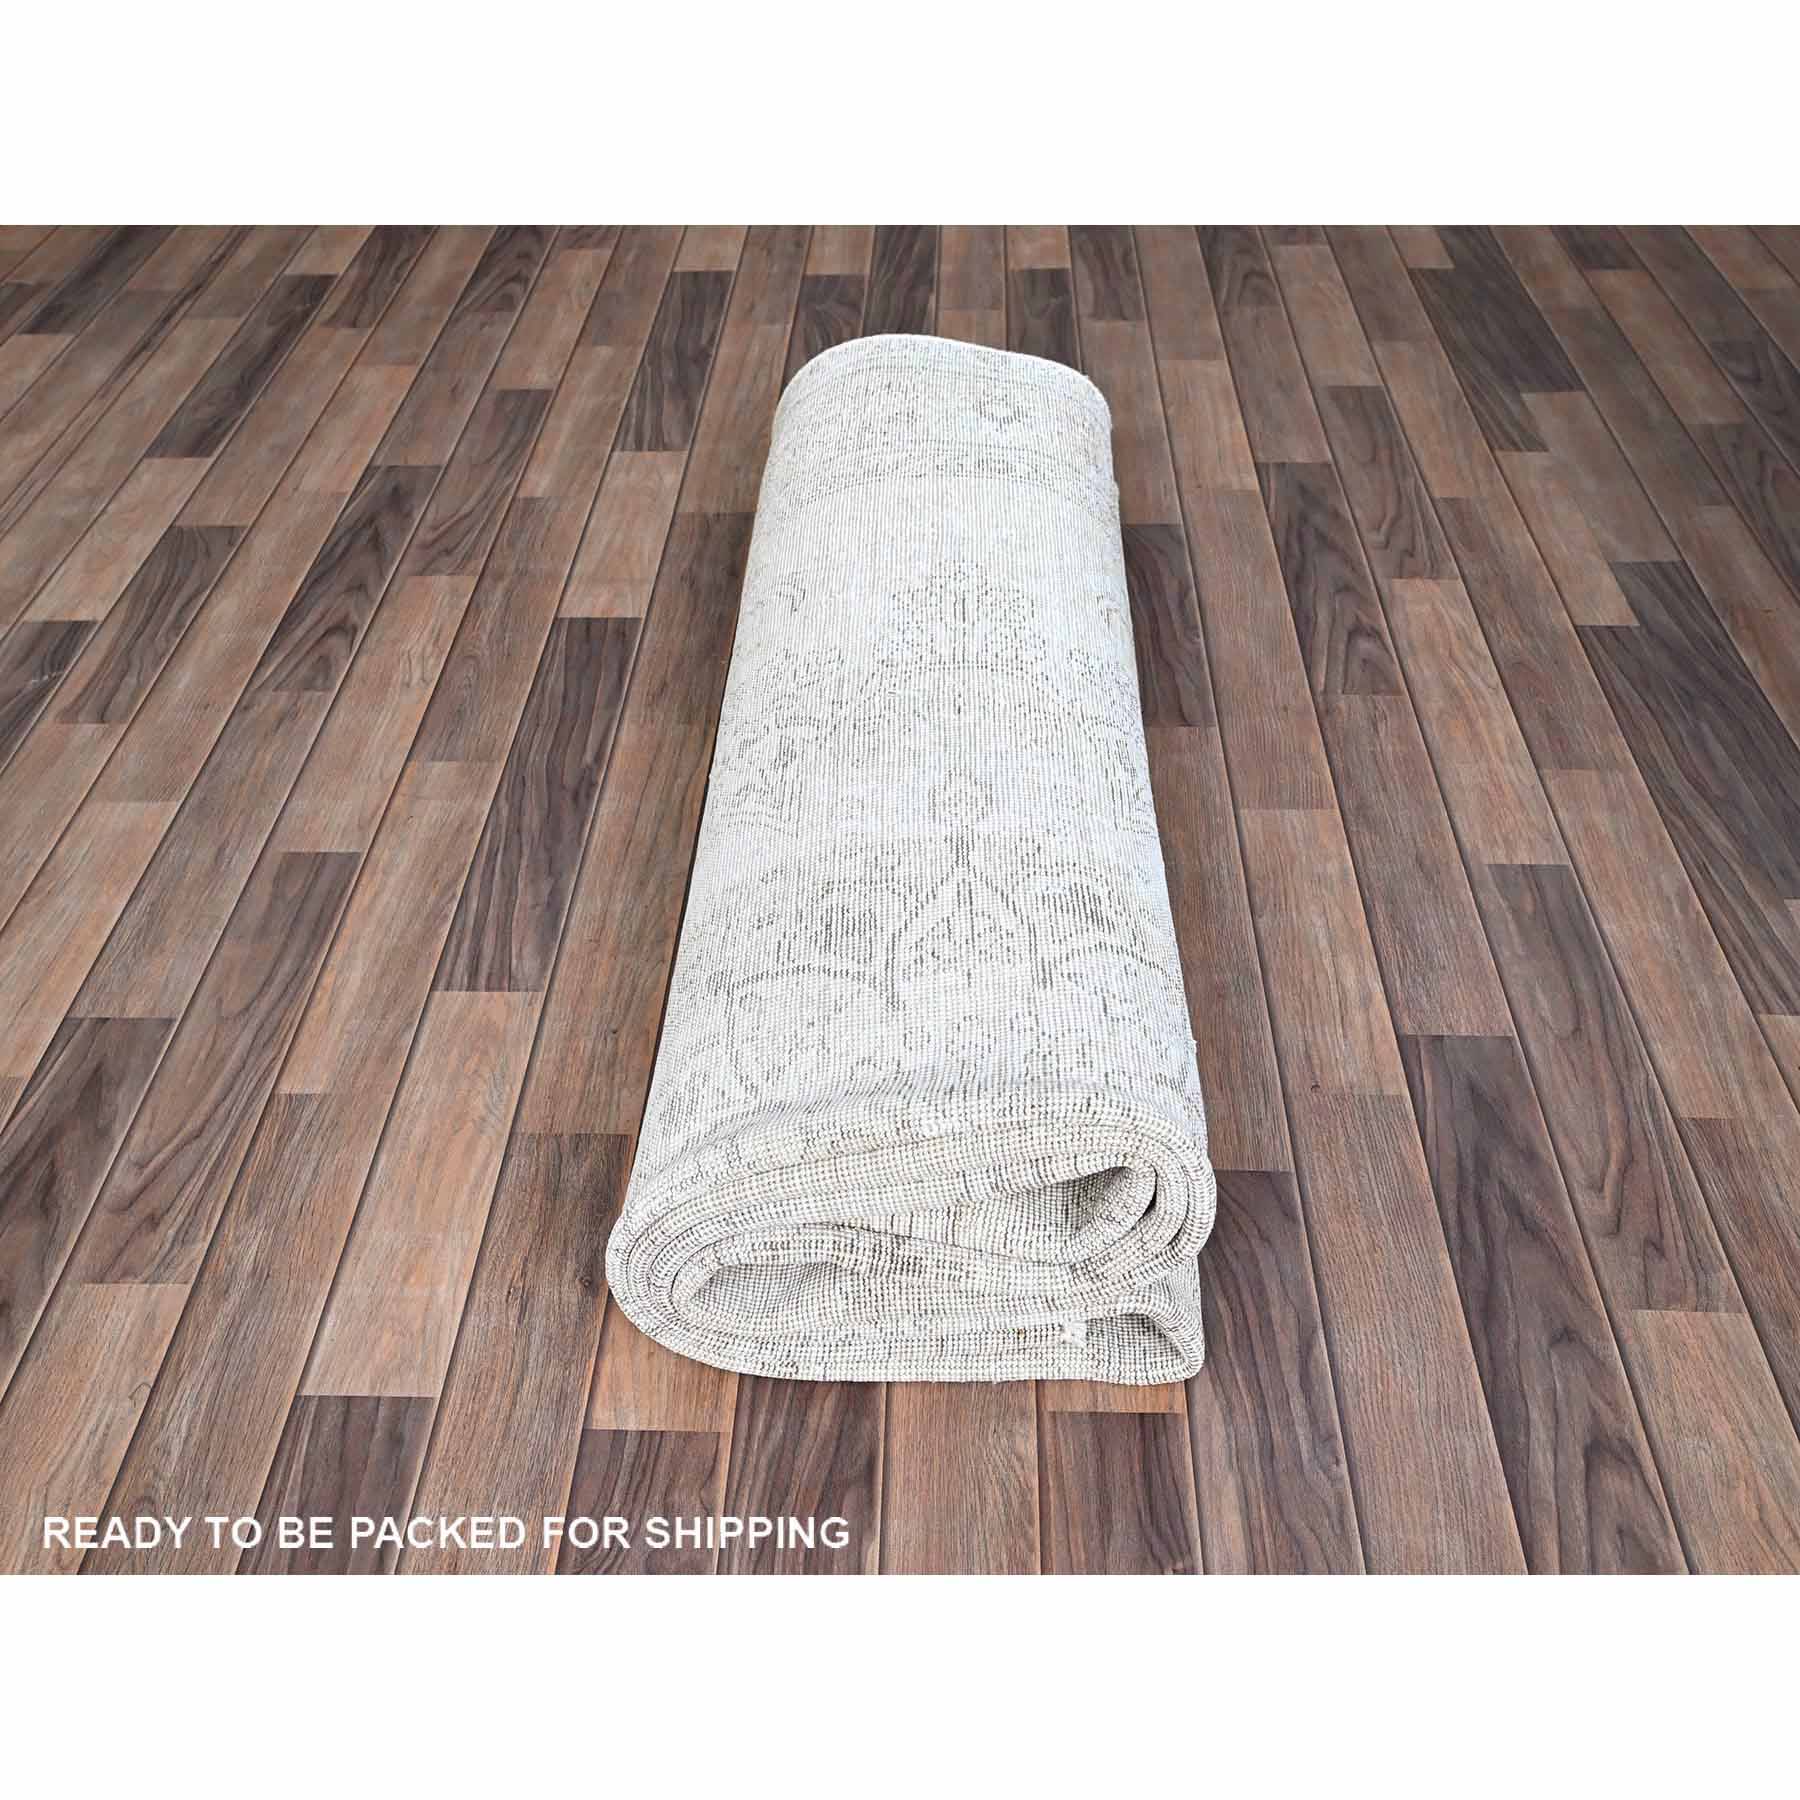 Overdyed-Vintage-Hand-Knotted-Rug-430465